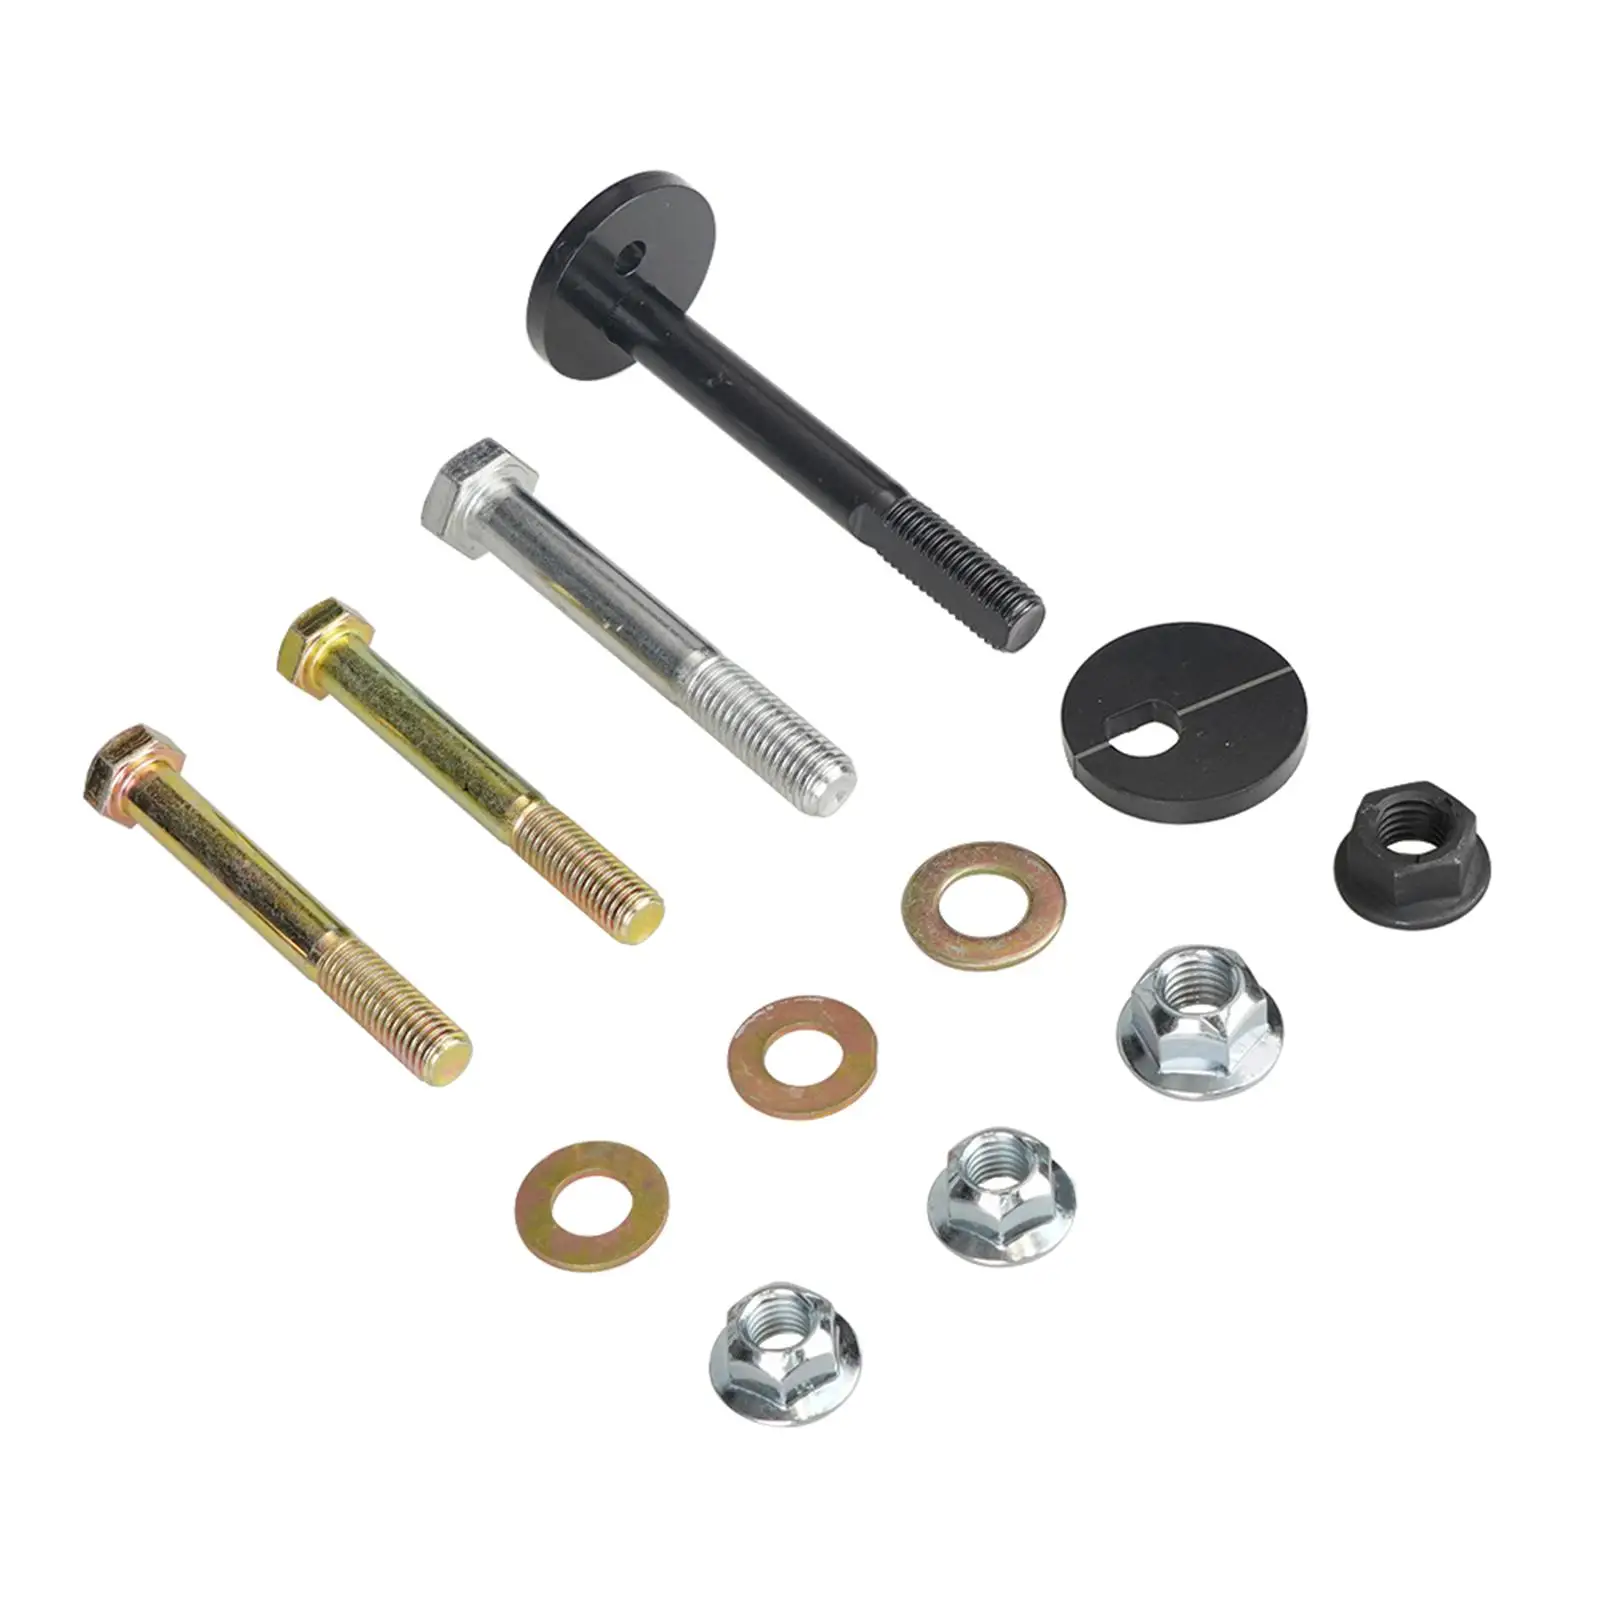 Front cam Bolts Reliable Repair Hardware Kit for Dodge RAM 1500 2000 to 2001 2500 3500 2000 to 2002 Lightweight Easy to Use